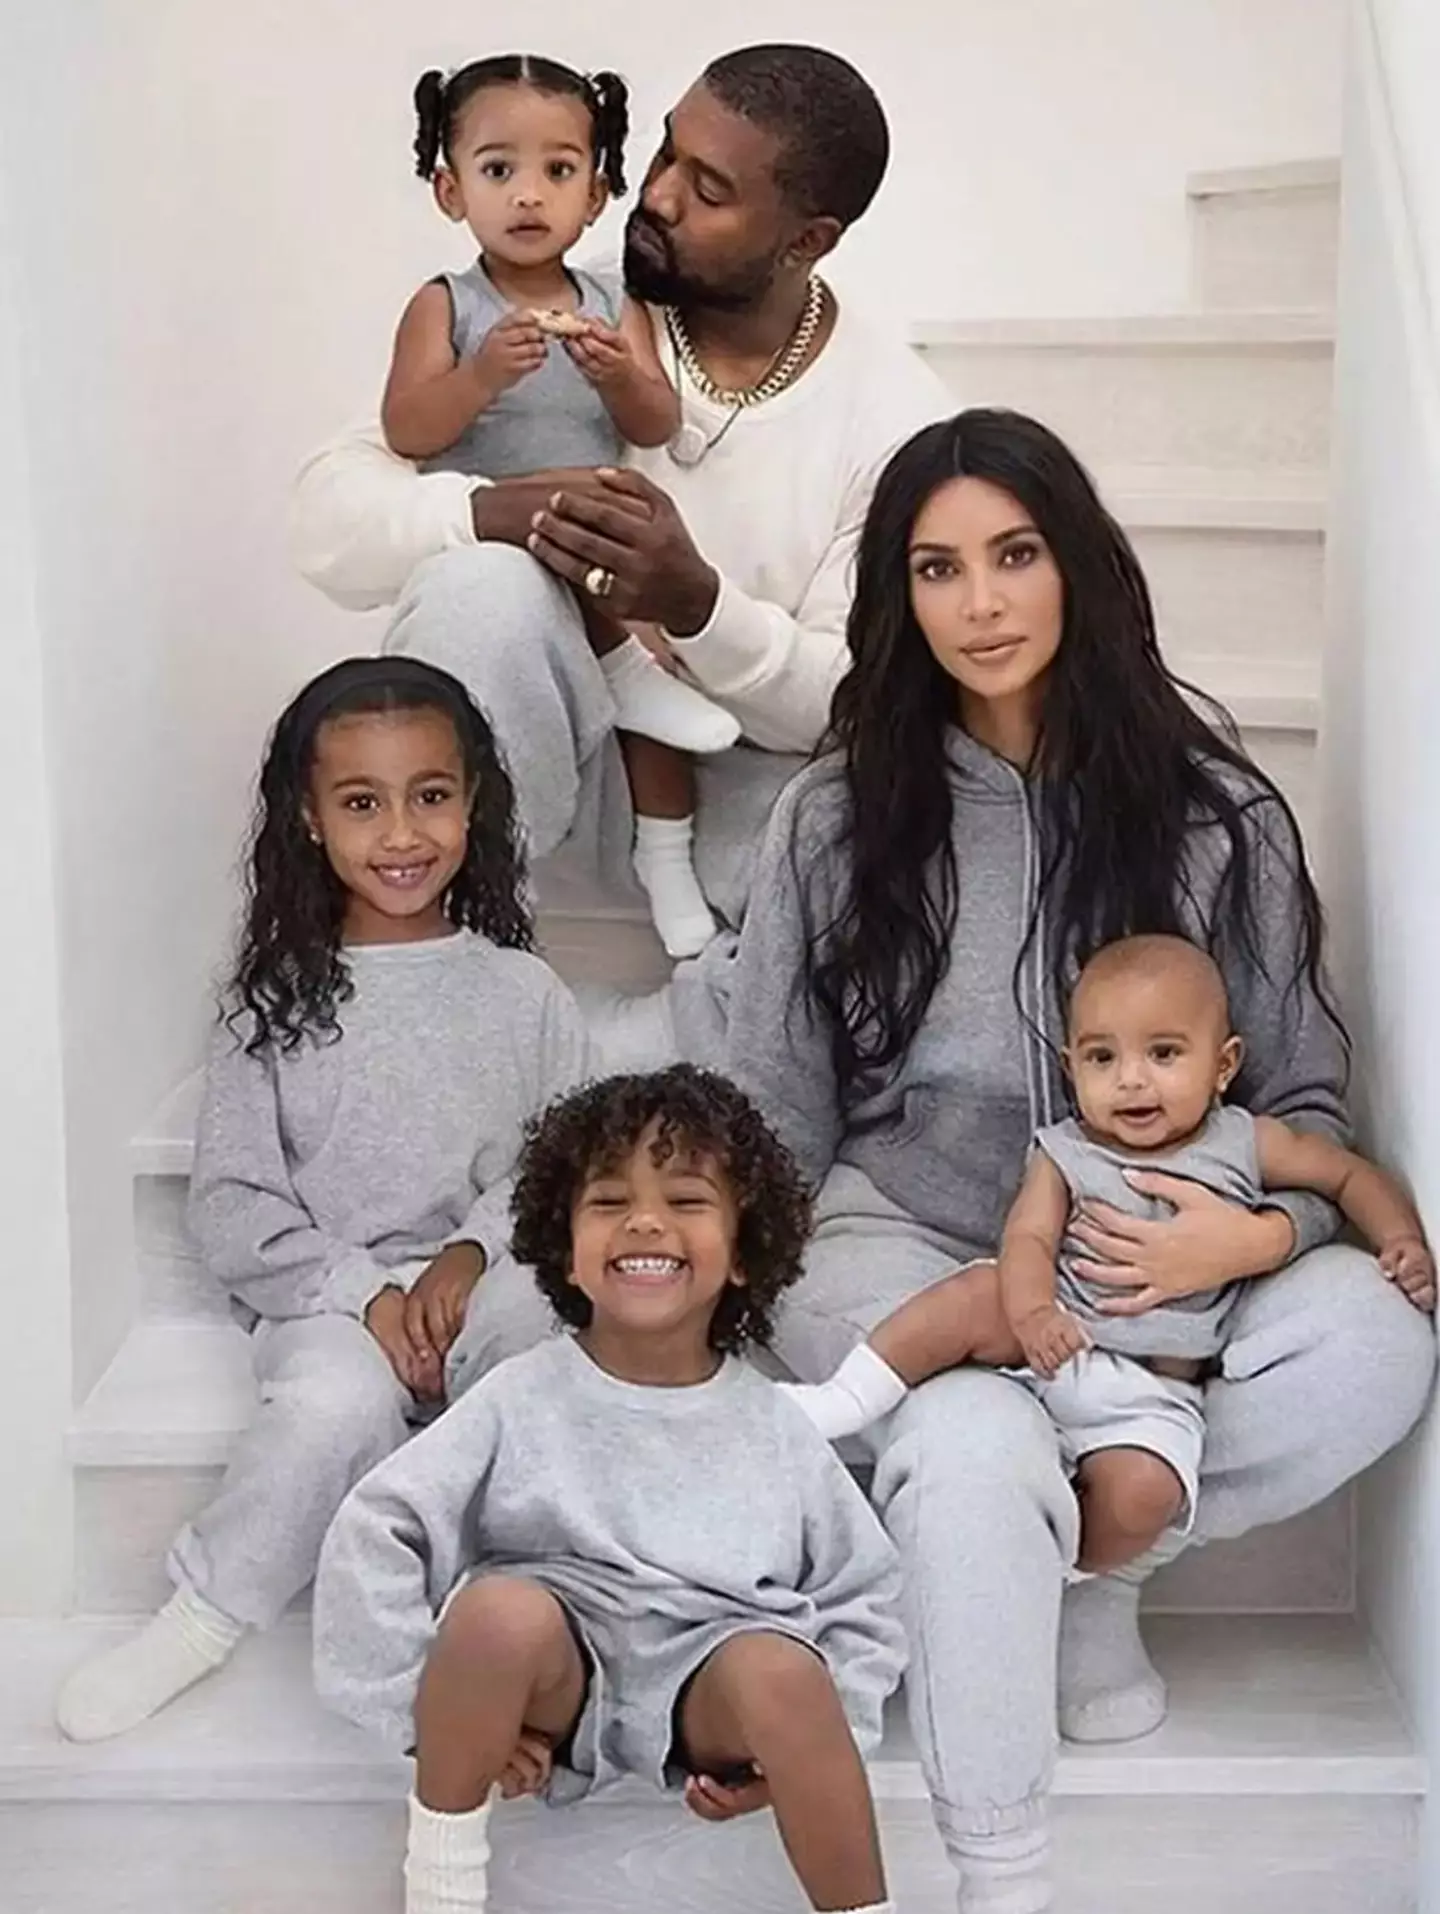 According to the settlement, Kanye will pay $200,000 his share of child support per month.